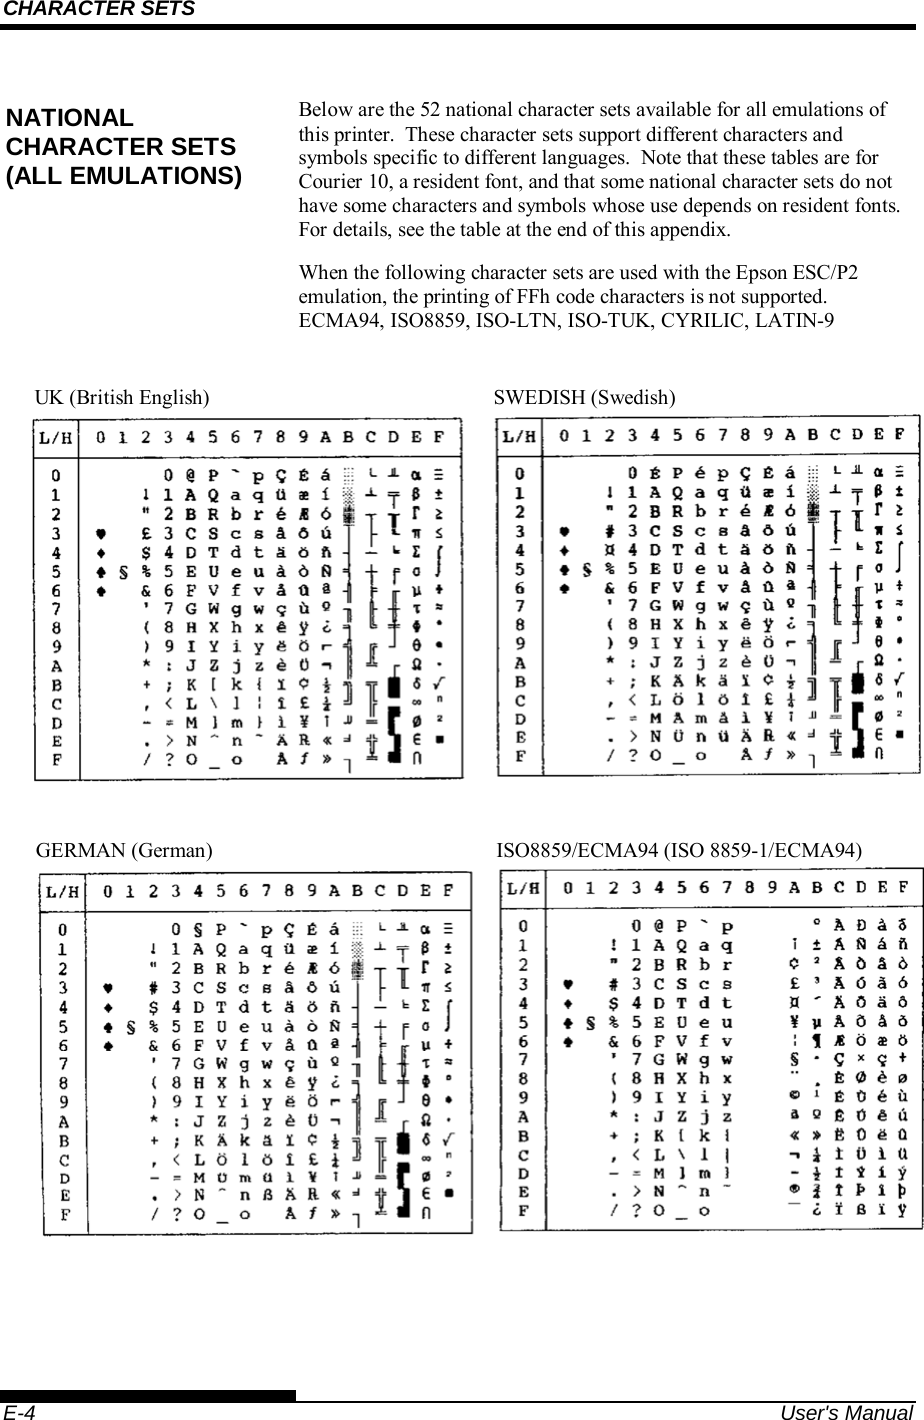 CHARACTER SETS    E-4  User&apos;s Manual Below are the 52 national character sets available for all emulations of this printer.  These character sets support different characters and symbols specific to different languages.  Note that these tables are for Courier 10, a resident font, and that some national character sets do not have some characters and symbols whose use depends on resident fonts.  For details, see the table at the end of this appendix. When the following character sets are used with the Epson ESC/P2 emulation, the printing of FFh code characters is not supported. ECMA94, ISO8859, ISO-LTN, ISO-TUK, CYRILIC, LATIN-9     NATIONAL CHARACTER SETS (ALL EMULATIONS) UK (British English)  SWEDISH (Swedish) GERMAN (German)  ISO8859/ECMA94 (ISO 8859-1/ECMA94)  